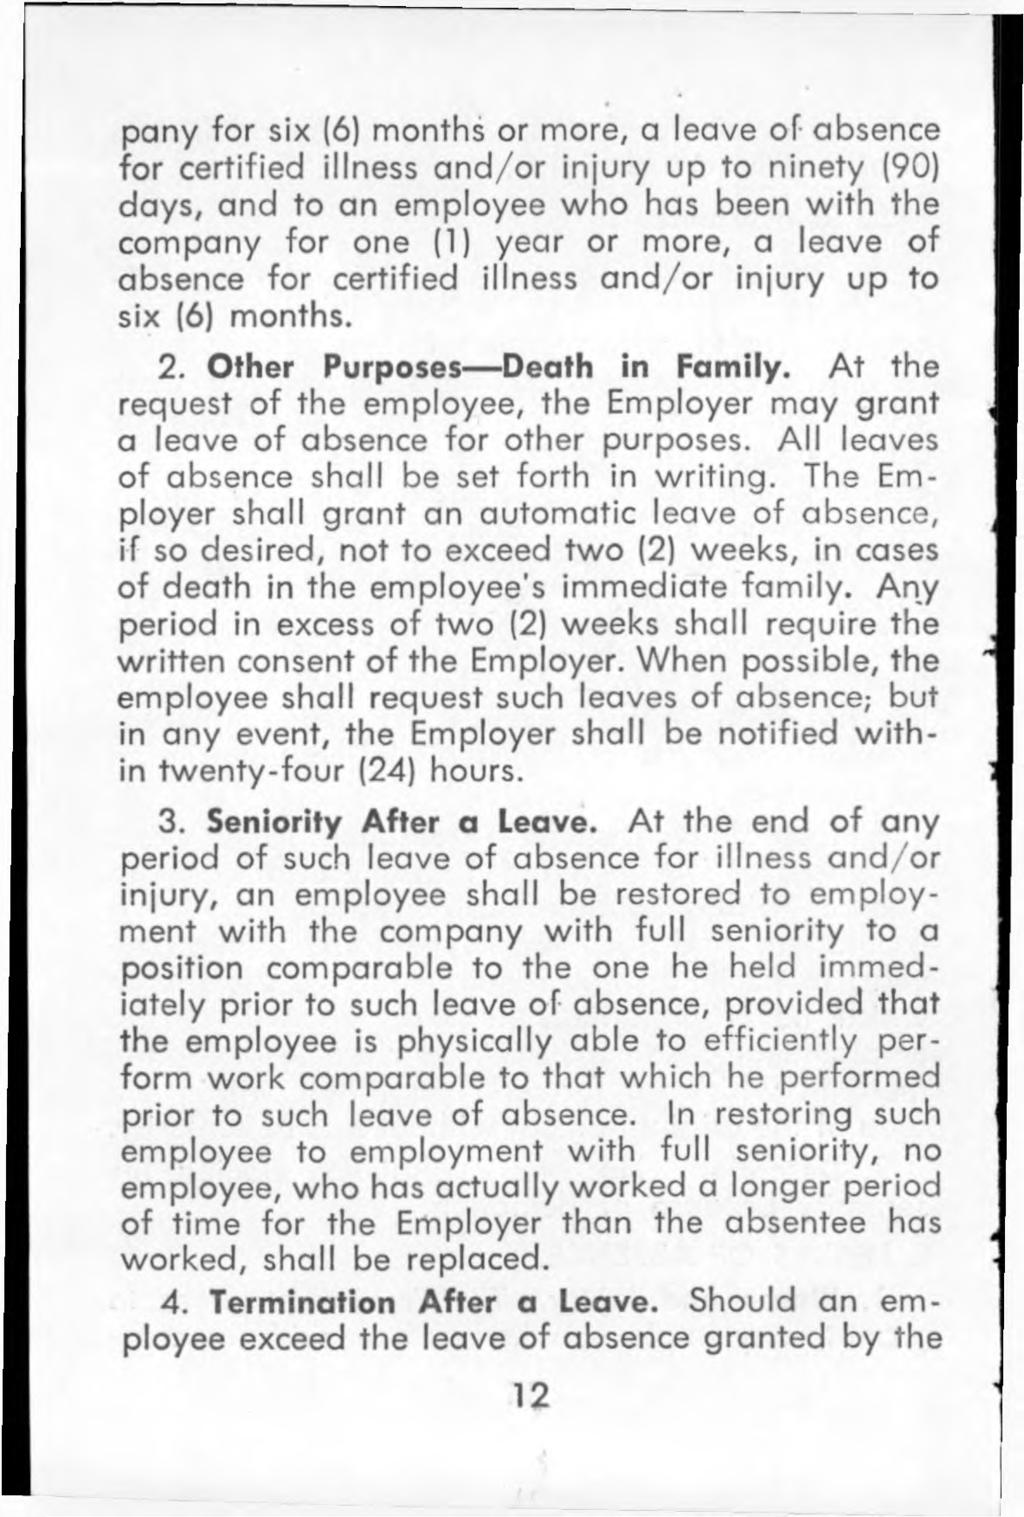 pany for six (6) months or more, a leave o f absence fo r certified illness a n d /o r injury up to ninety (90) days, and to an employee w ho has been w ith the company for one (1) year or more, a